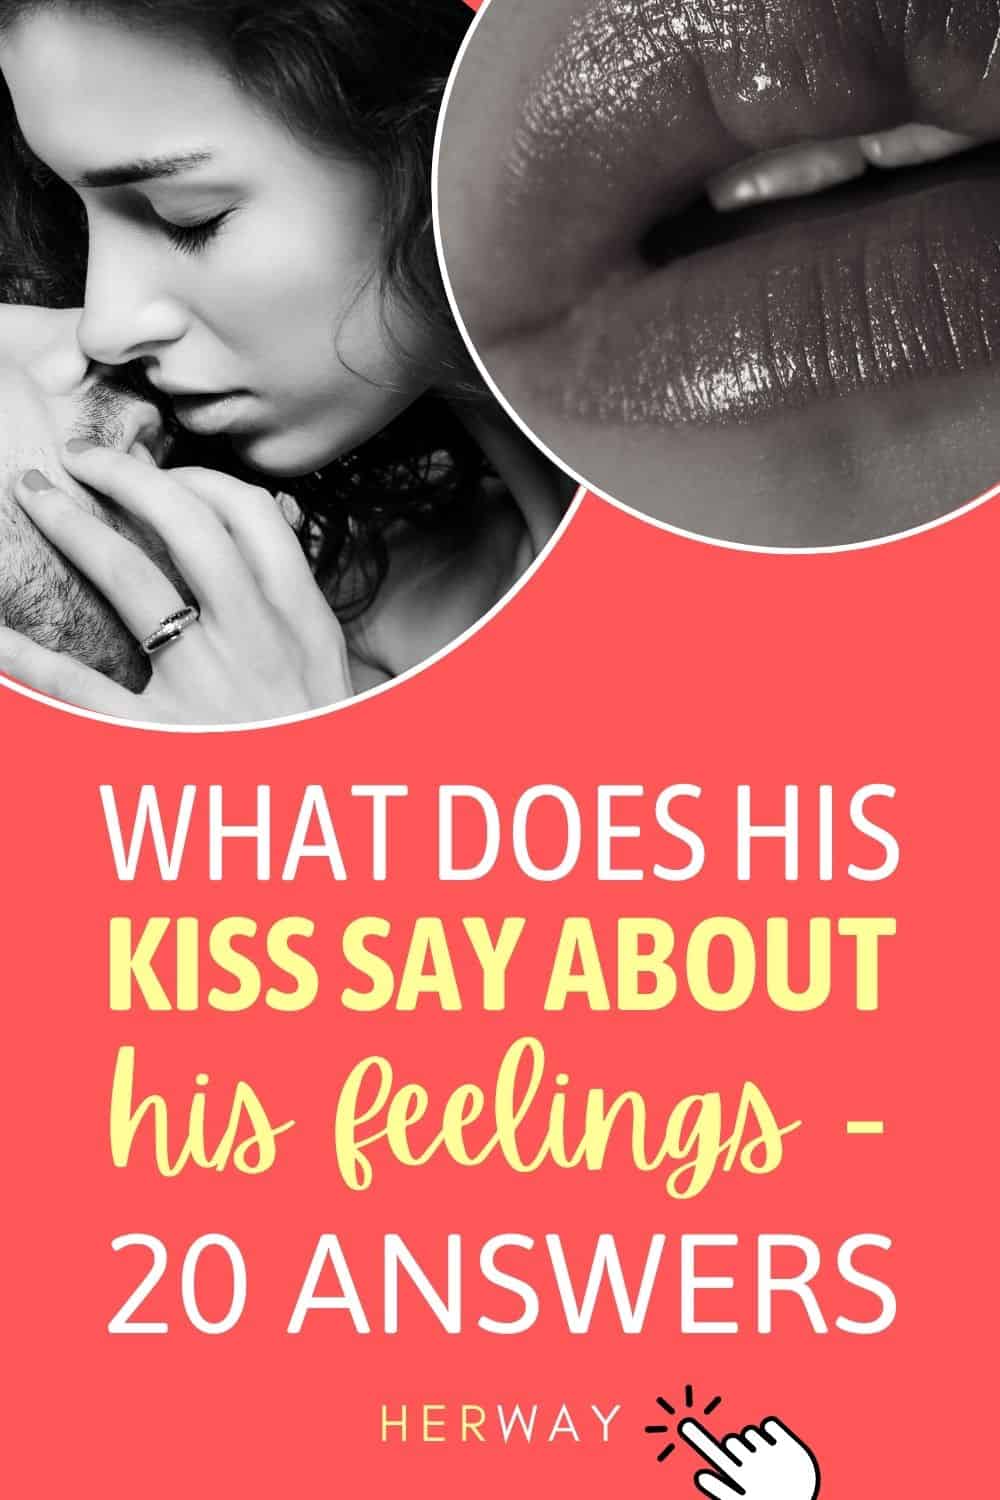 How To Tell He Loves You By His Kiss 20 Common Types Of Kisses Pinterest